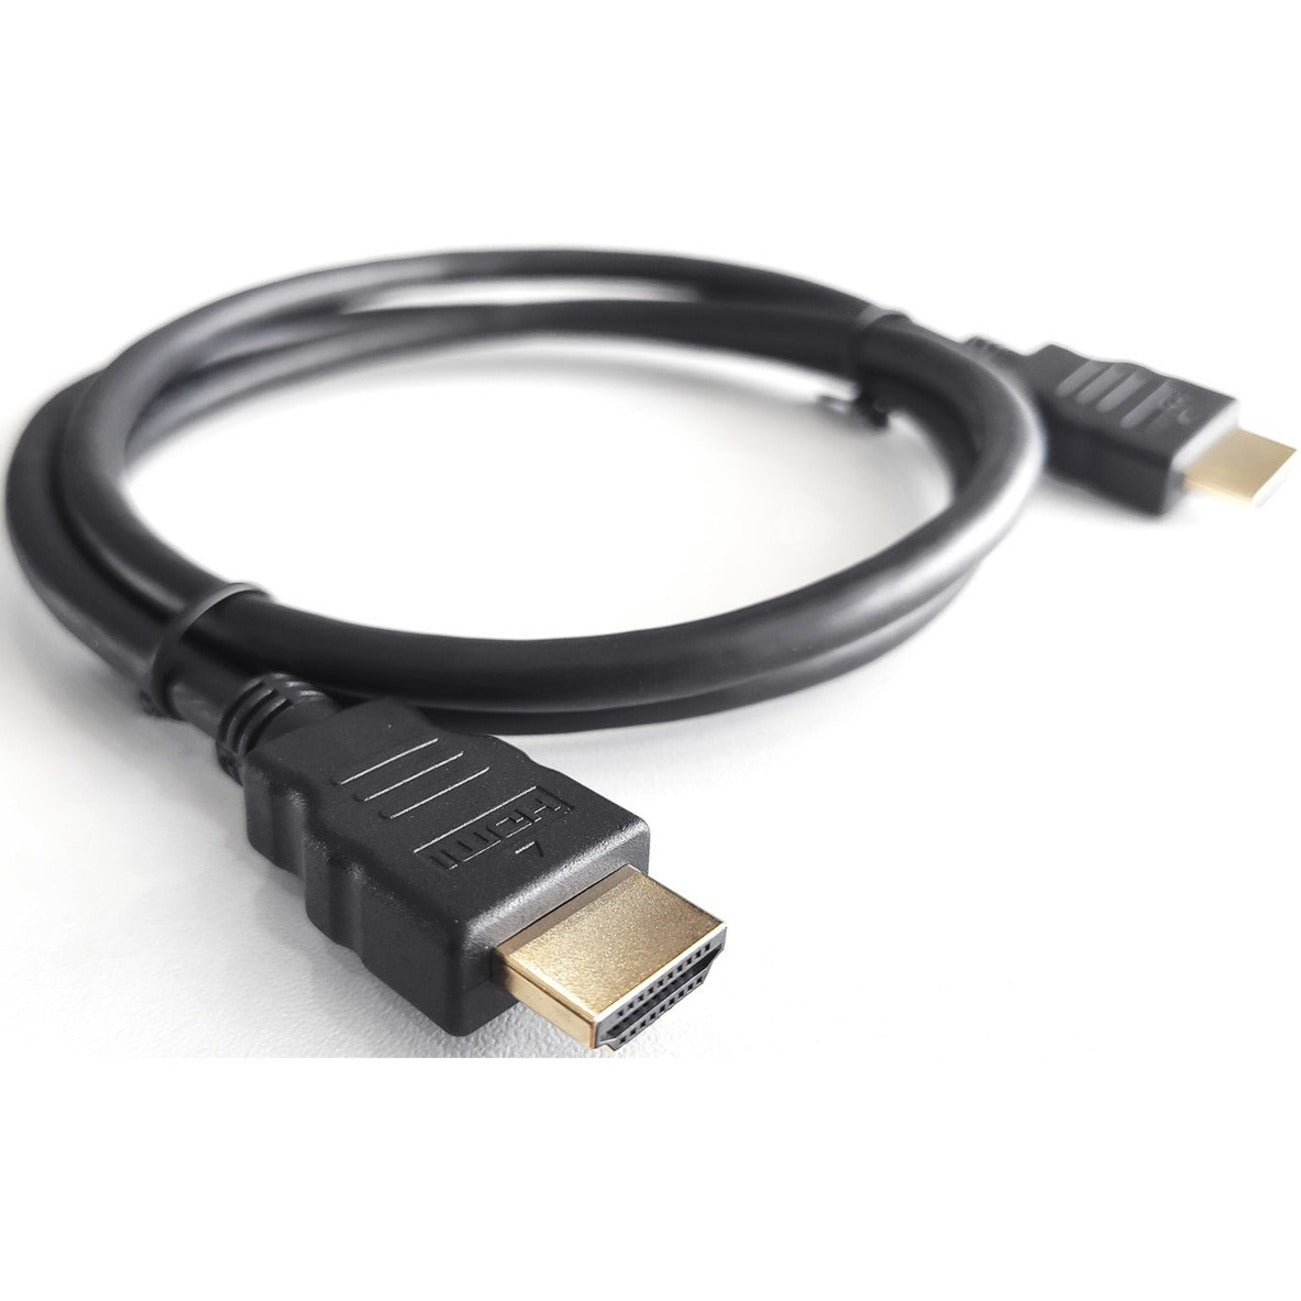 4XEM 4XHDMI8K5FT 5ft 1.5m Ultra High Speed 8K HDMI Cable, 48 Gbit/s Data Transfer Rate, Gold Plated Connectors